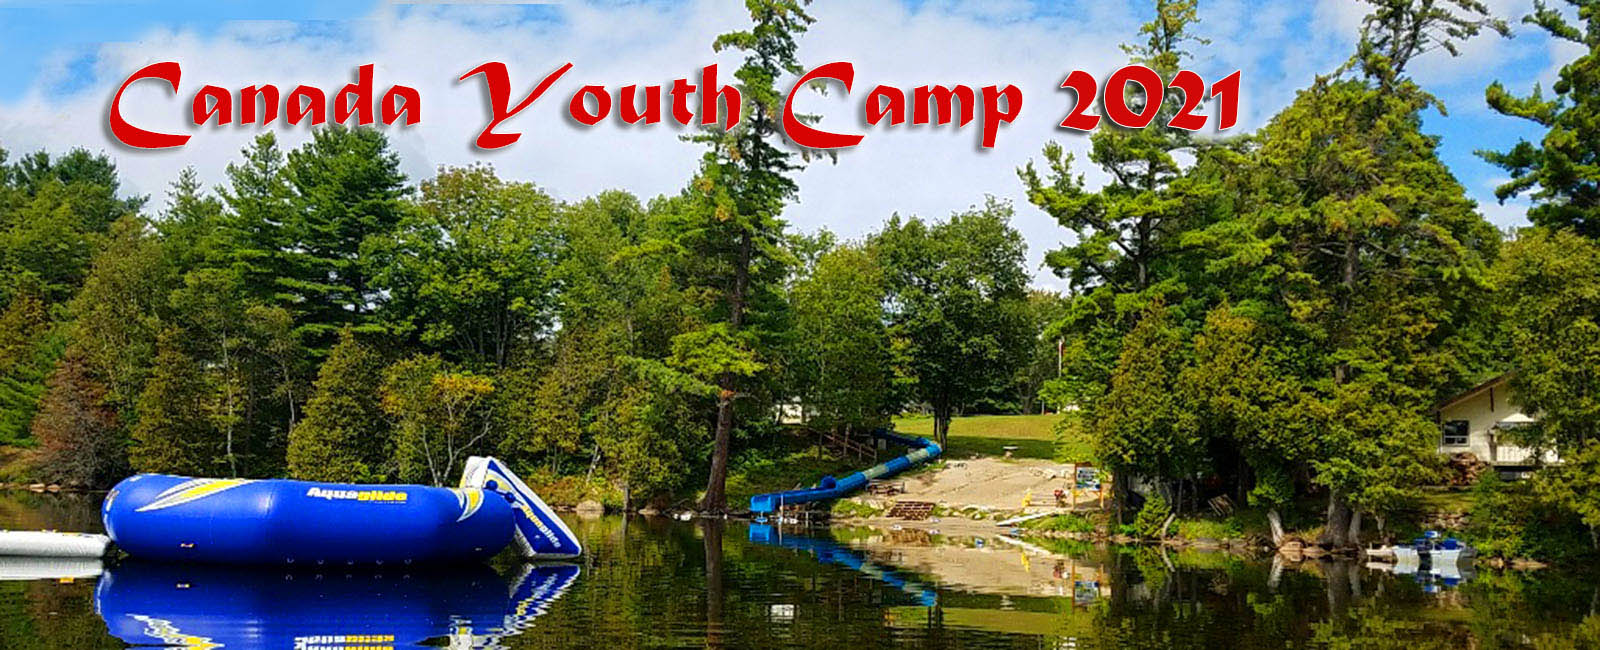 Canada Youth Camp